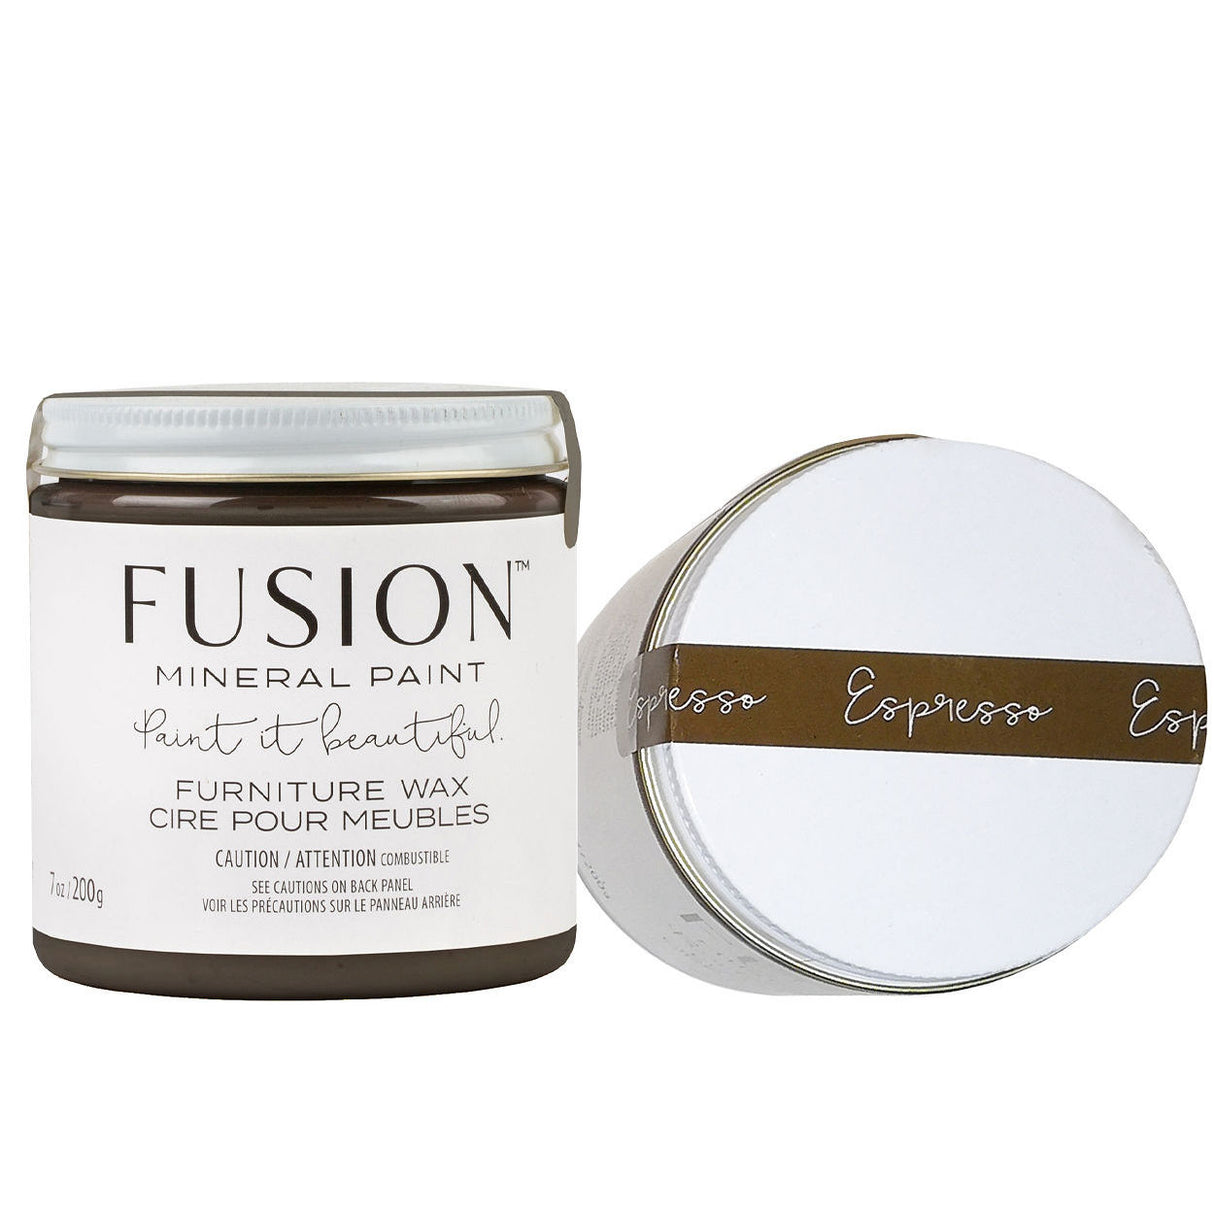 Espresso Furniture Wax by Fusion Mineral Paint @ Painted Heirloom